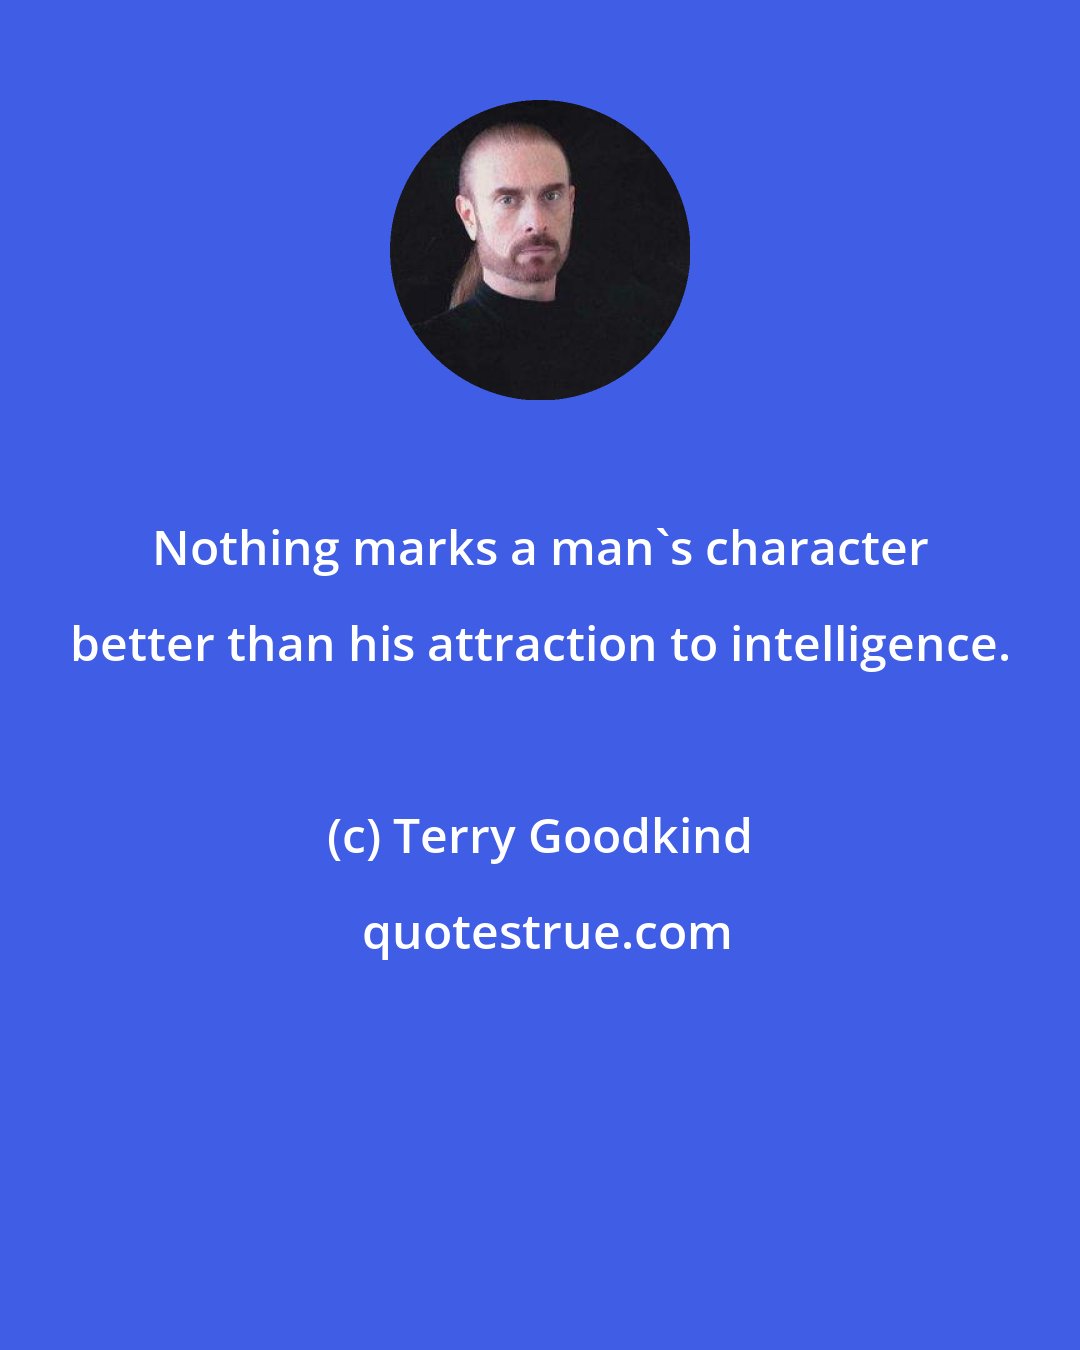 Terry Goodkind: Nothing marks a man's character better than his attraction to intelligence.